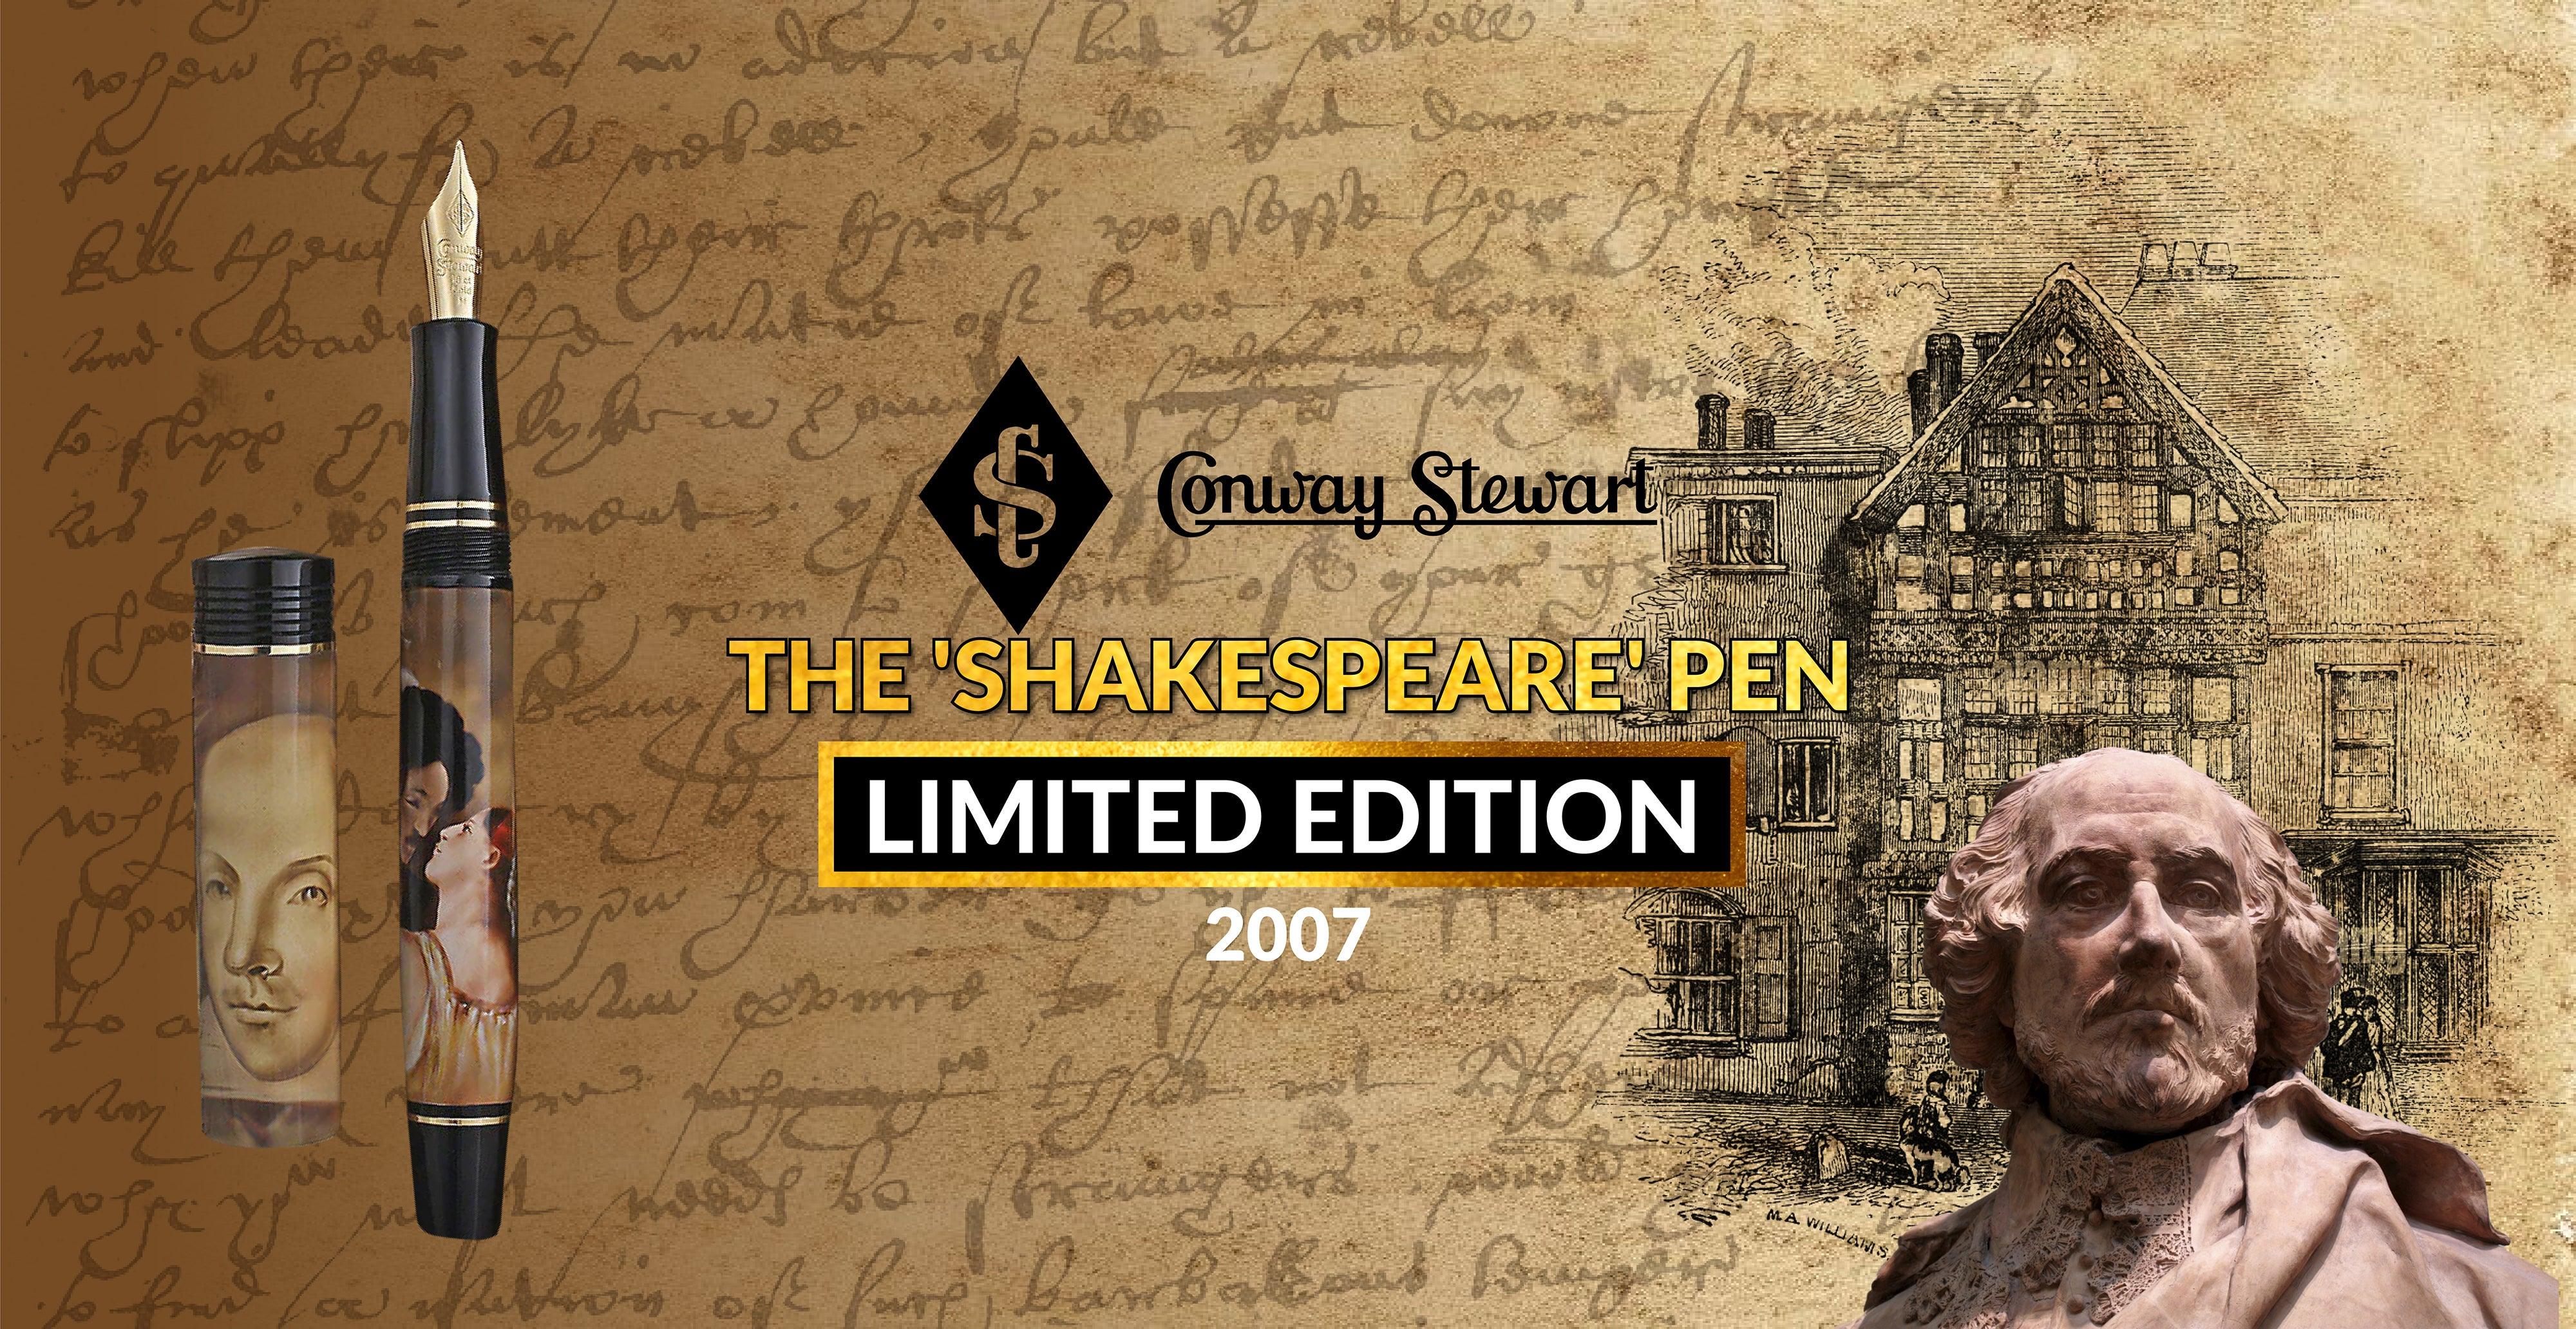 The 'Shakespeare' Pen 2007 conwaystewart.com